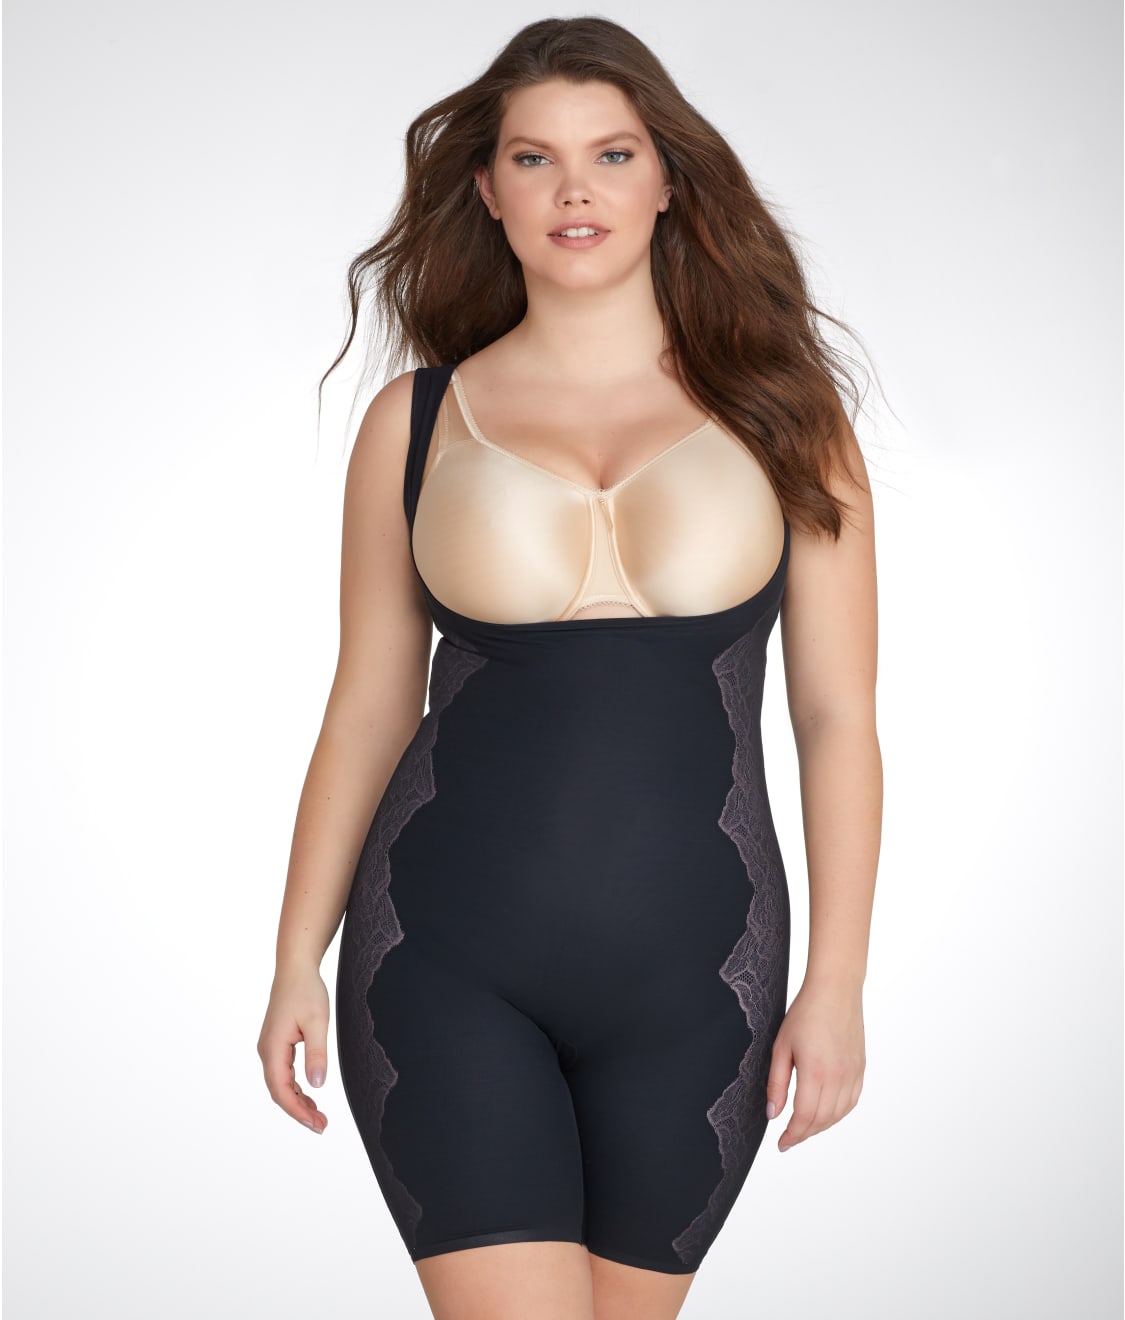 RED HOT SPANX Luxe & Lean Firm Control Bodysuit Plus Size